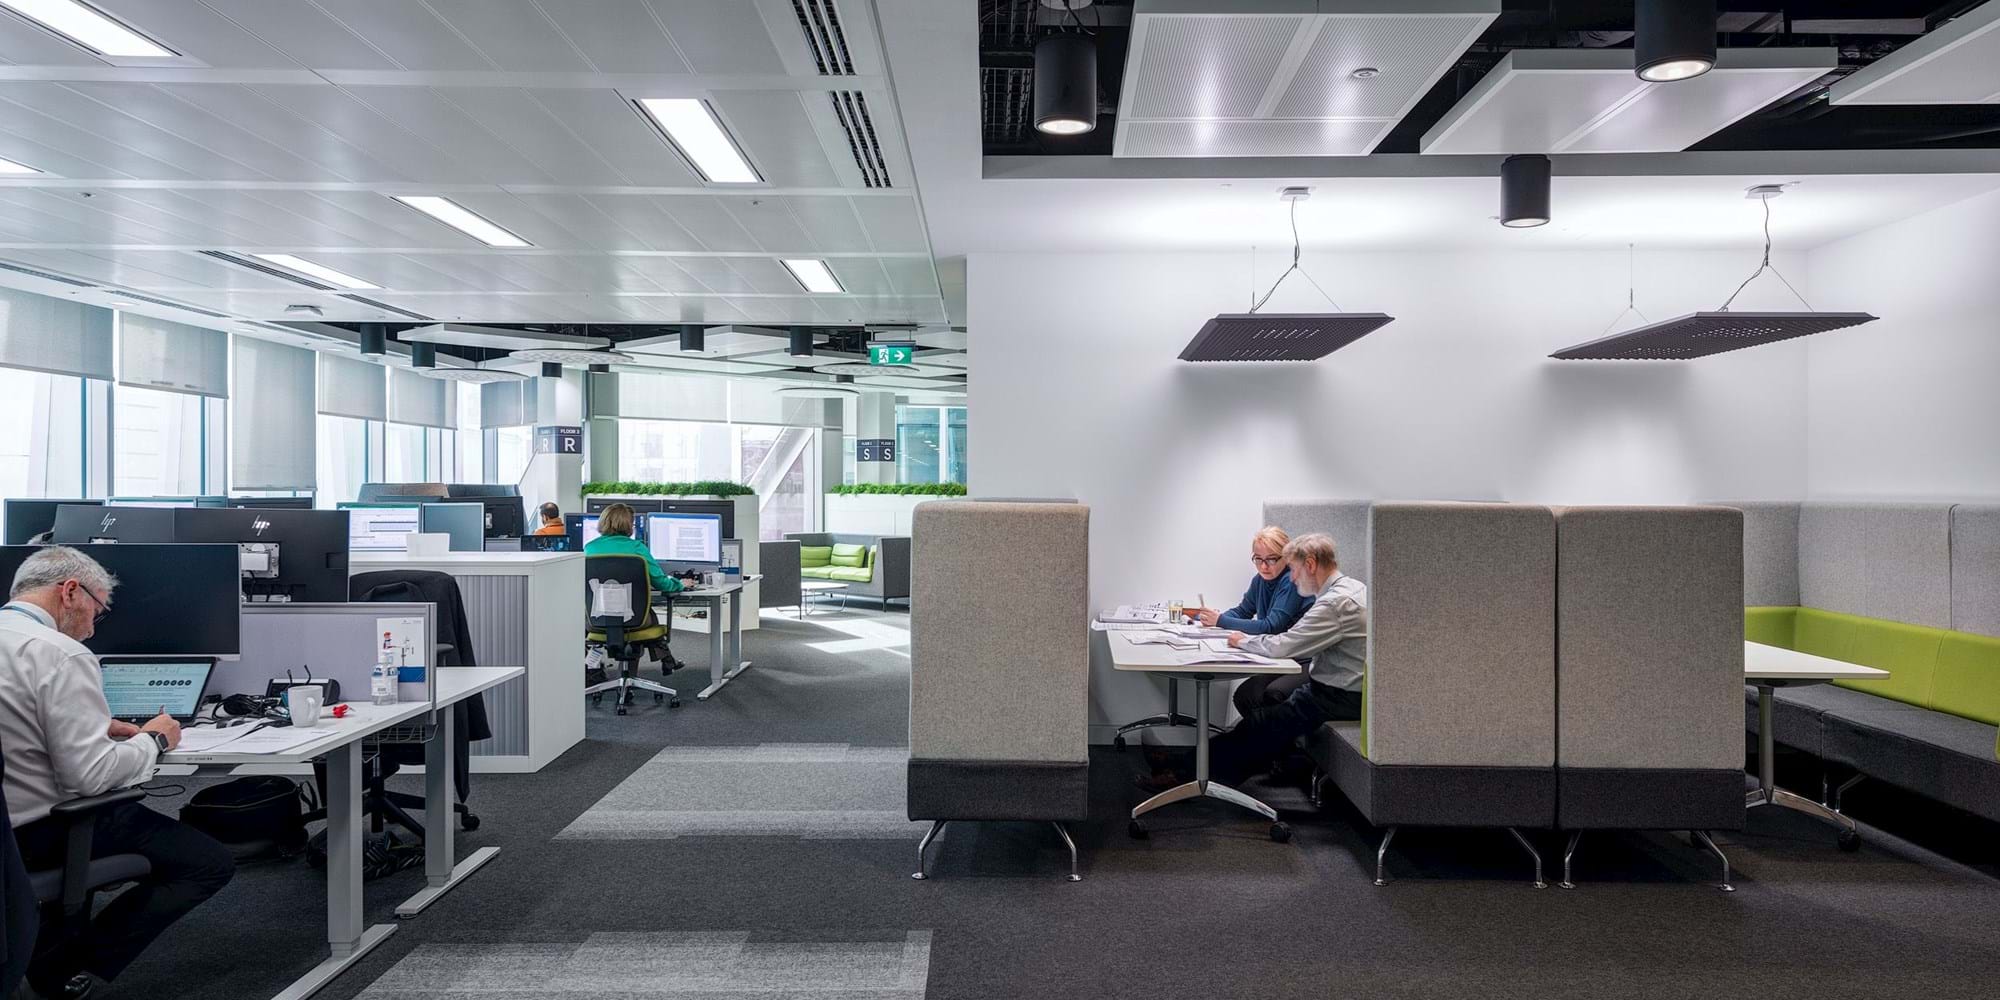 Modus Workspace office design, fit out and refurbishment - Atkins - Victoria, London - Atkins 02 highres sRGB.jpg